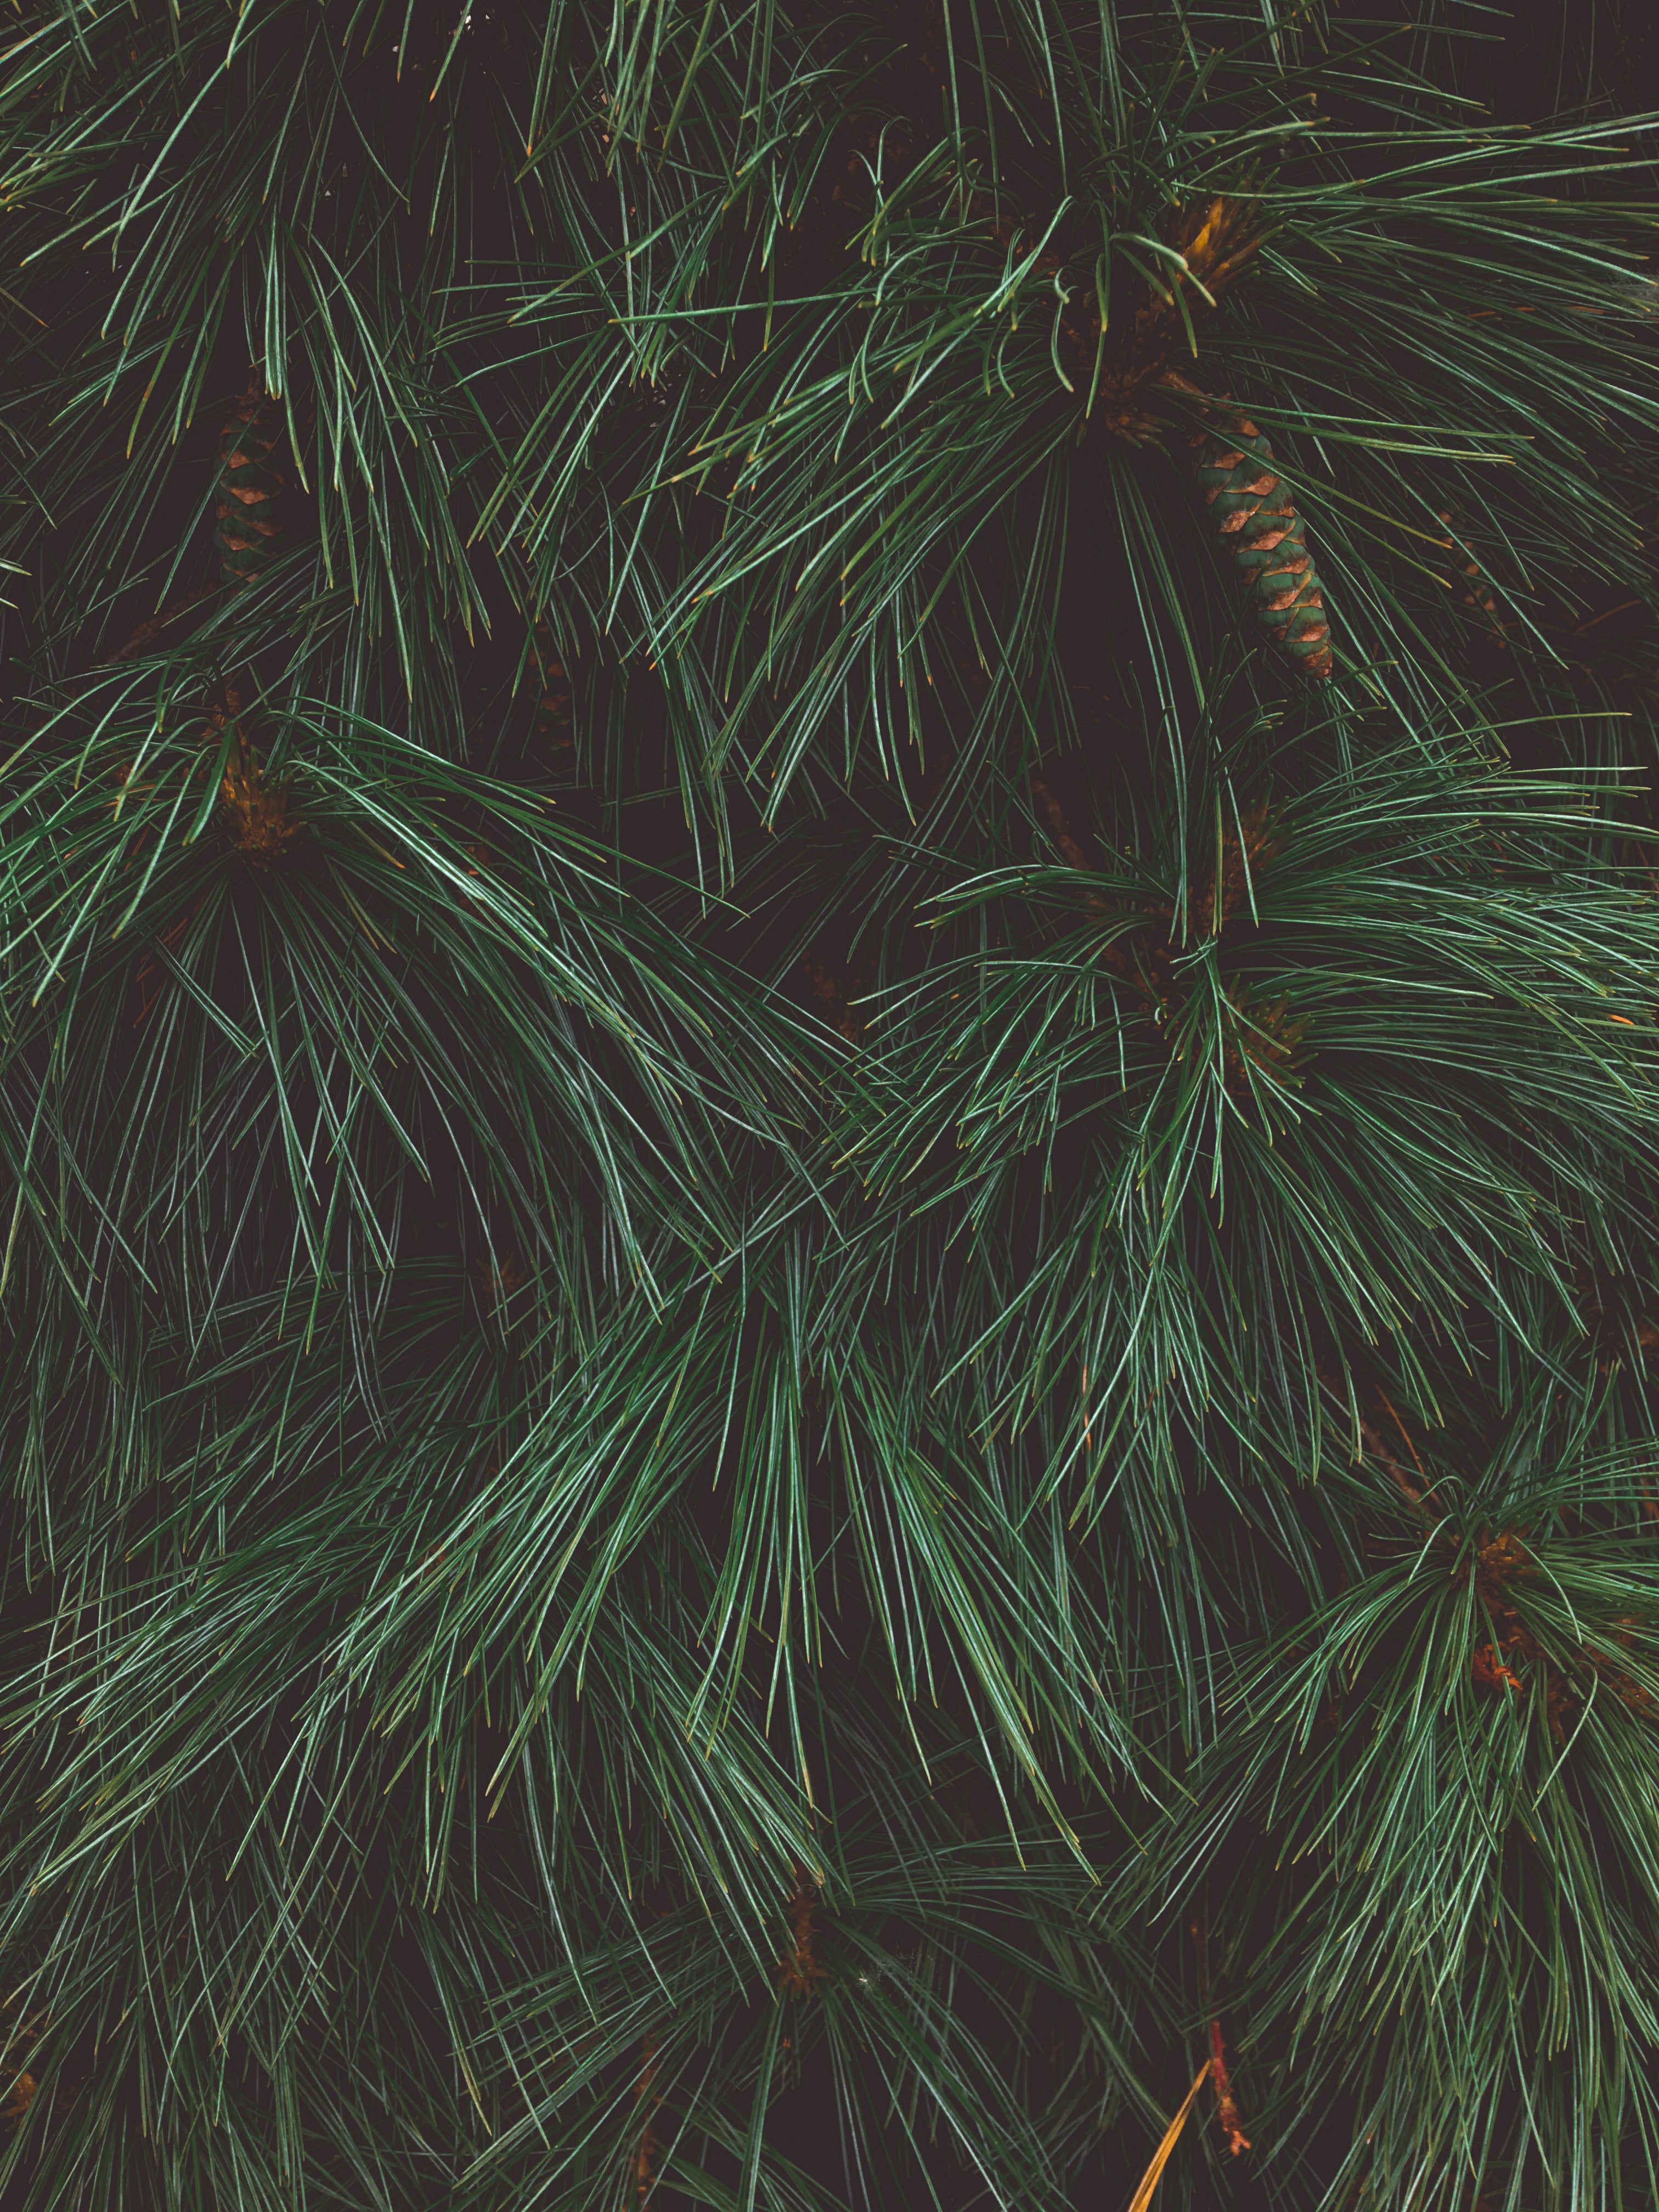 close-up-of-a-pine-tree-showing-texture-of-pine-needles.jpg